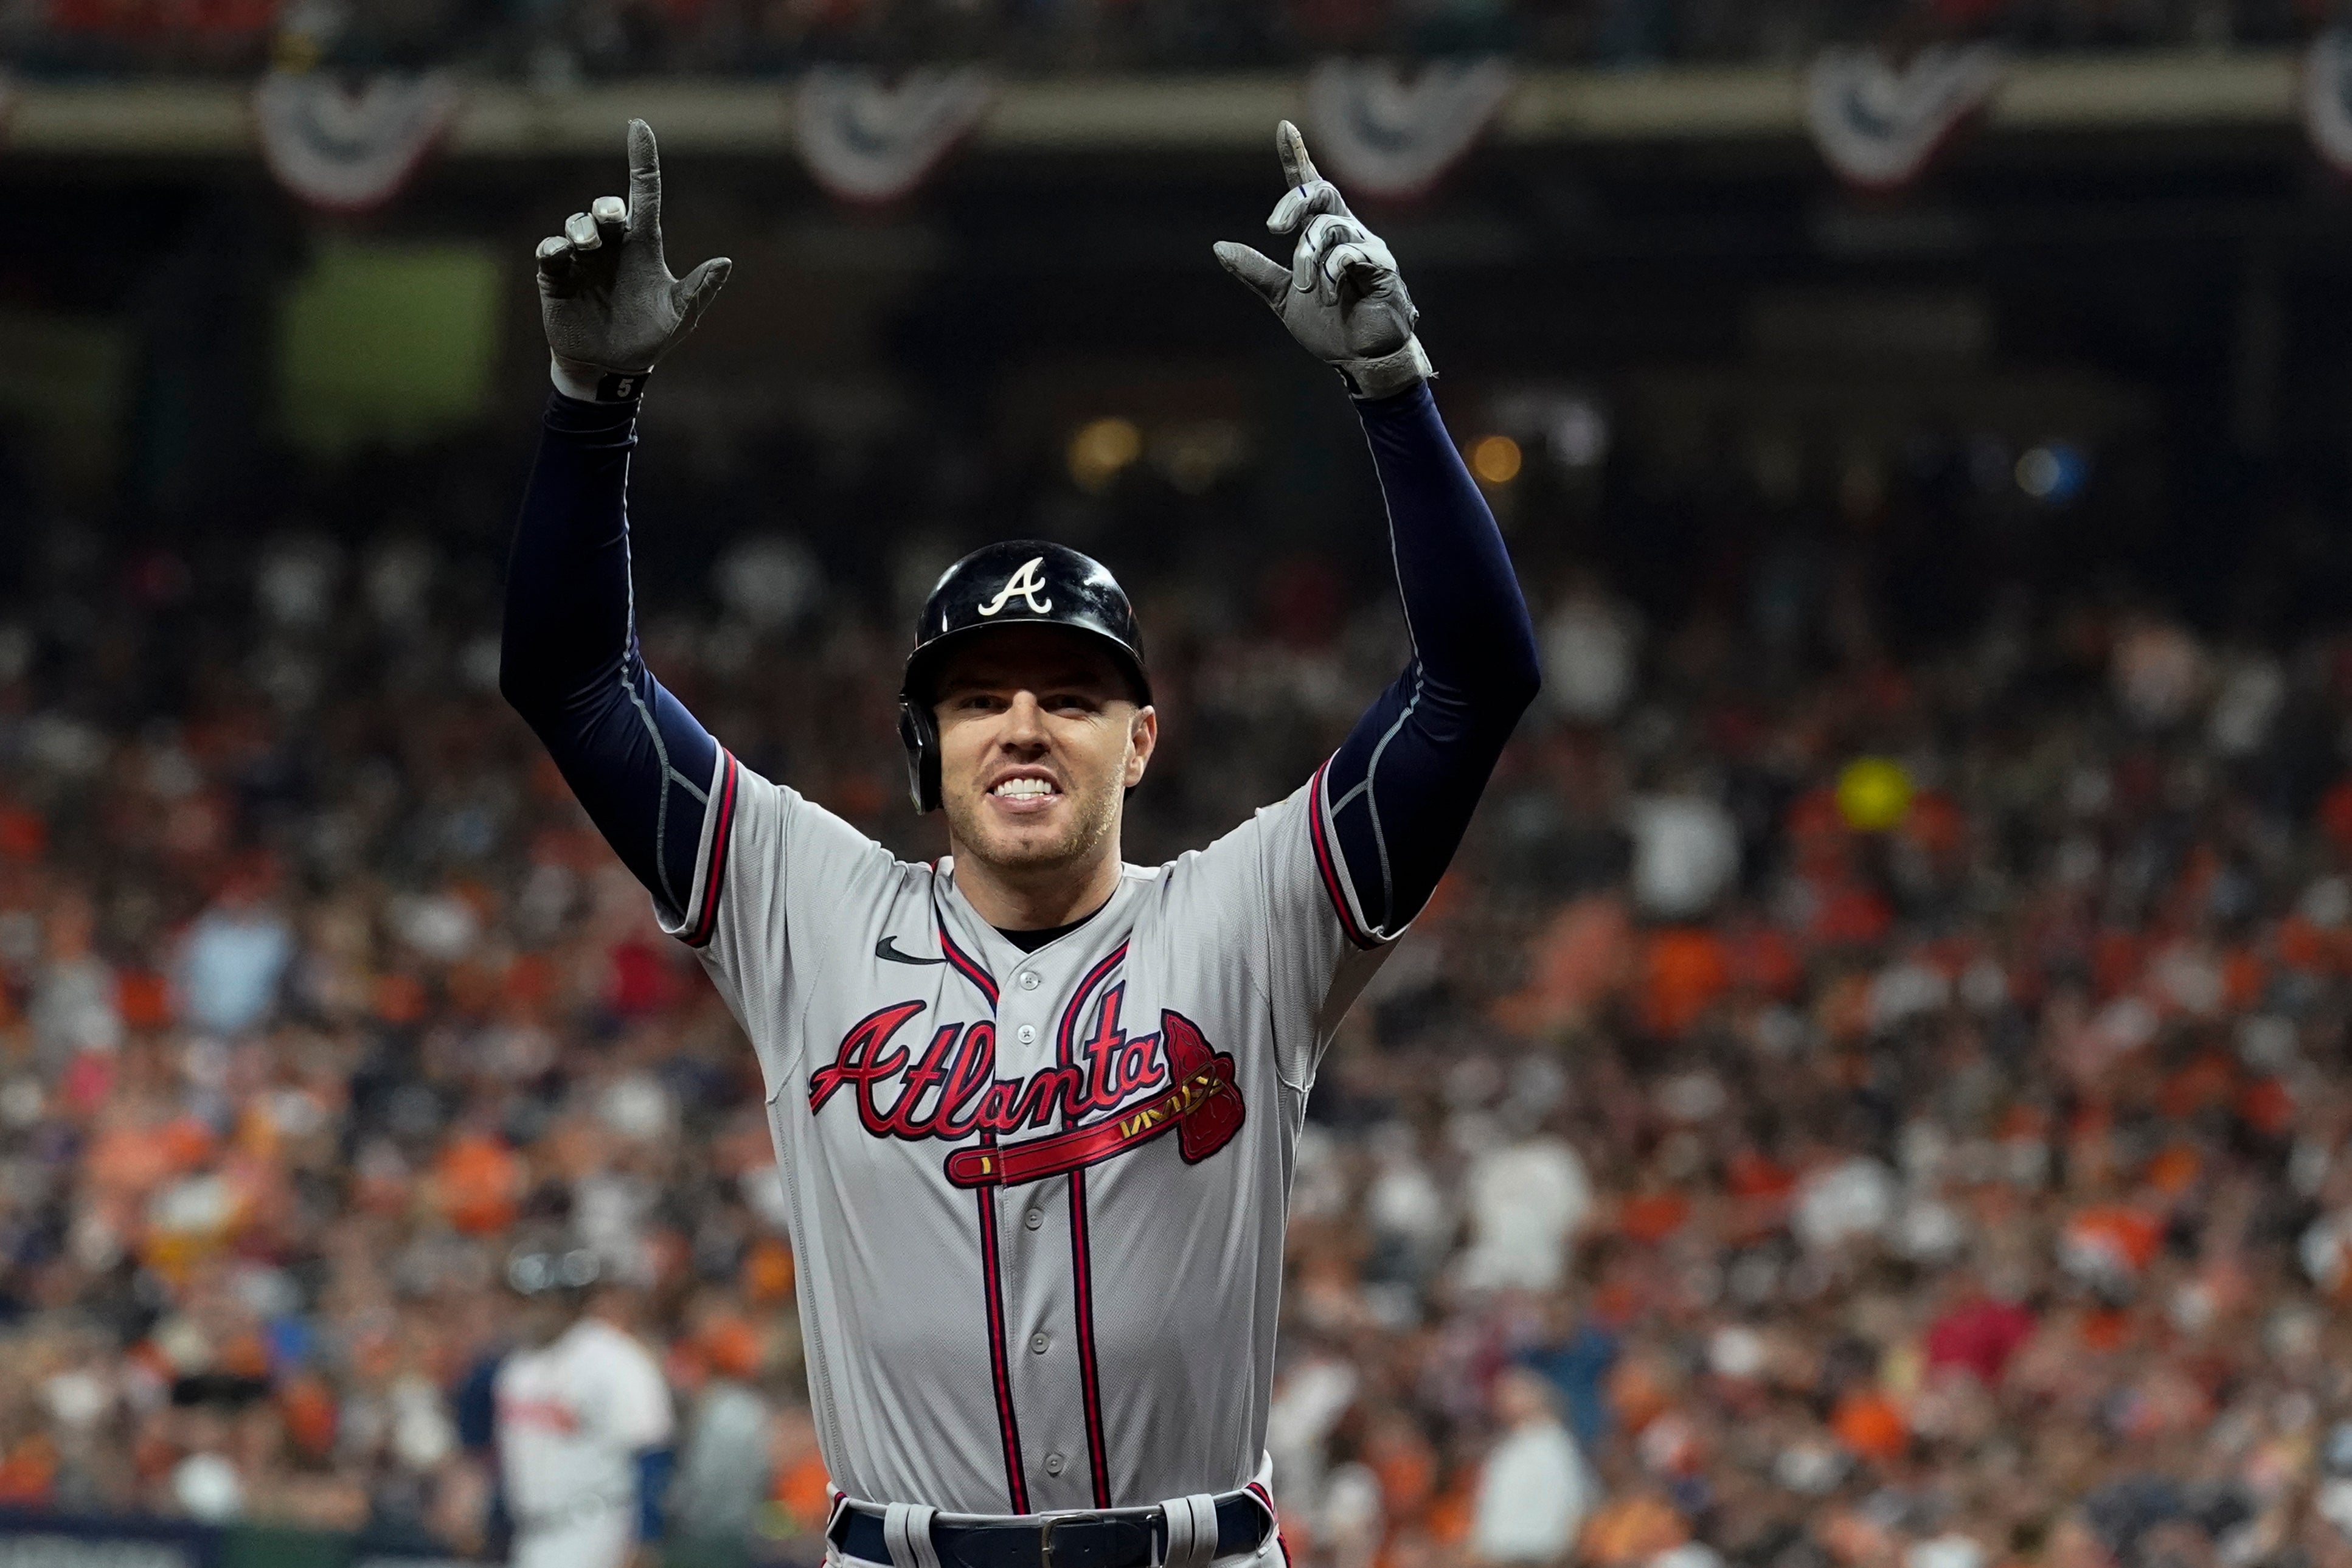 Atlanta Braves win 1st World Series title since 1995, defeating